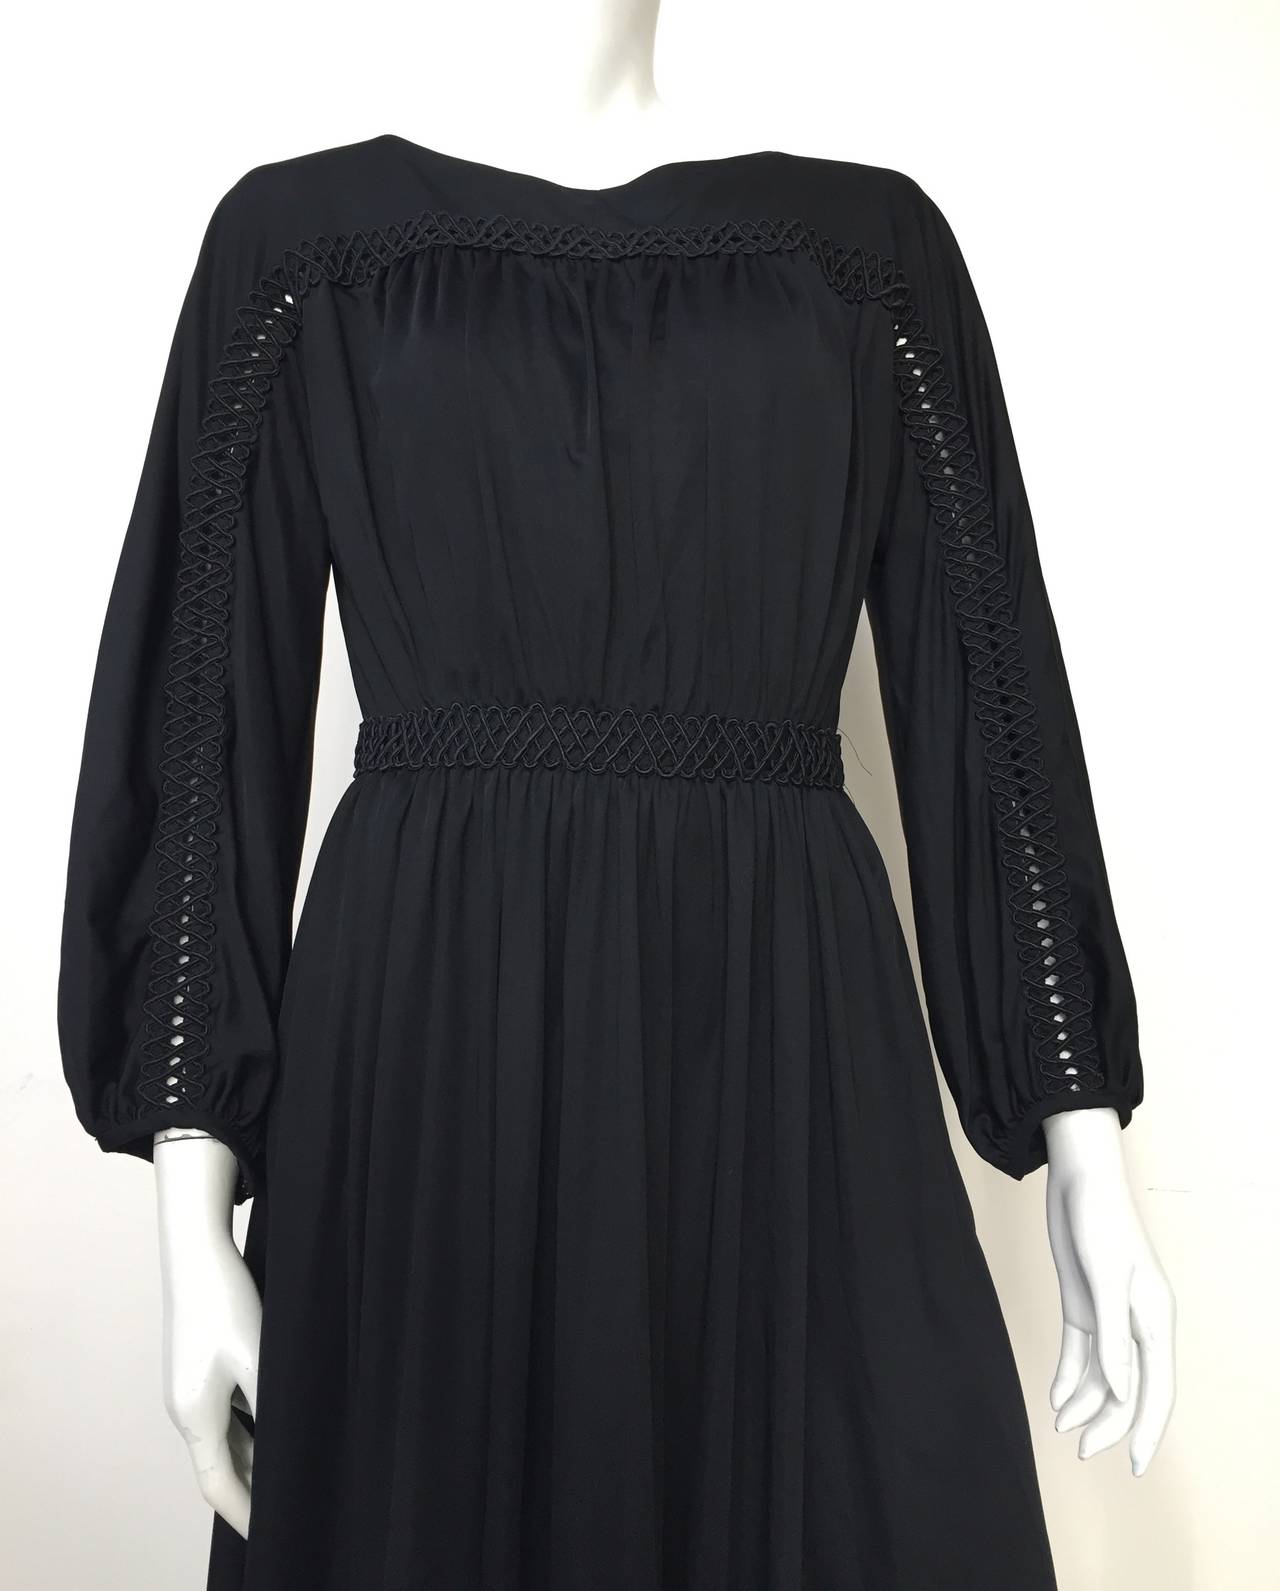 Donald Brooks 70s black jersey dress with pockets made in the USA size 6. Please use the measurements I provide to measure your body so that when it arrives you know it will fit you to perfection. Zipper on back with hook. Gorgeous cutout trim as